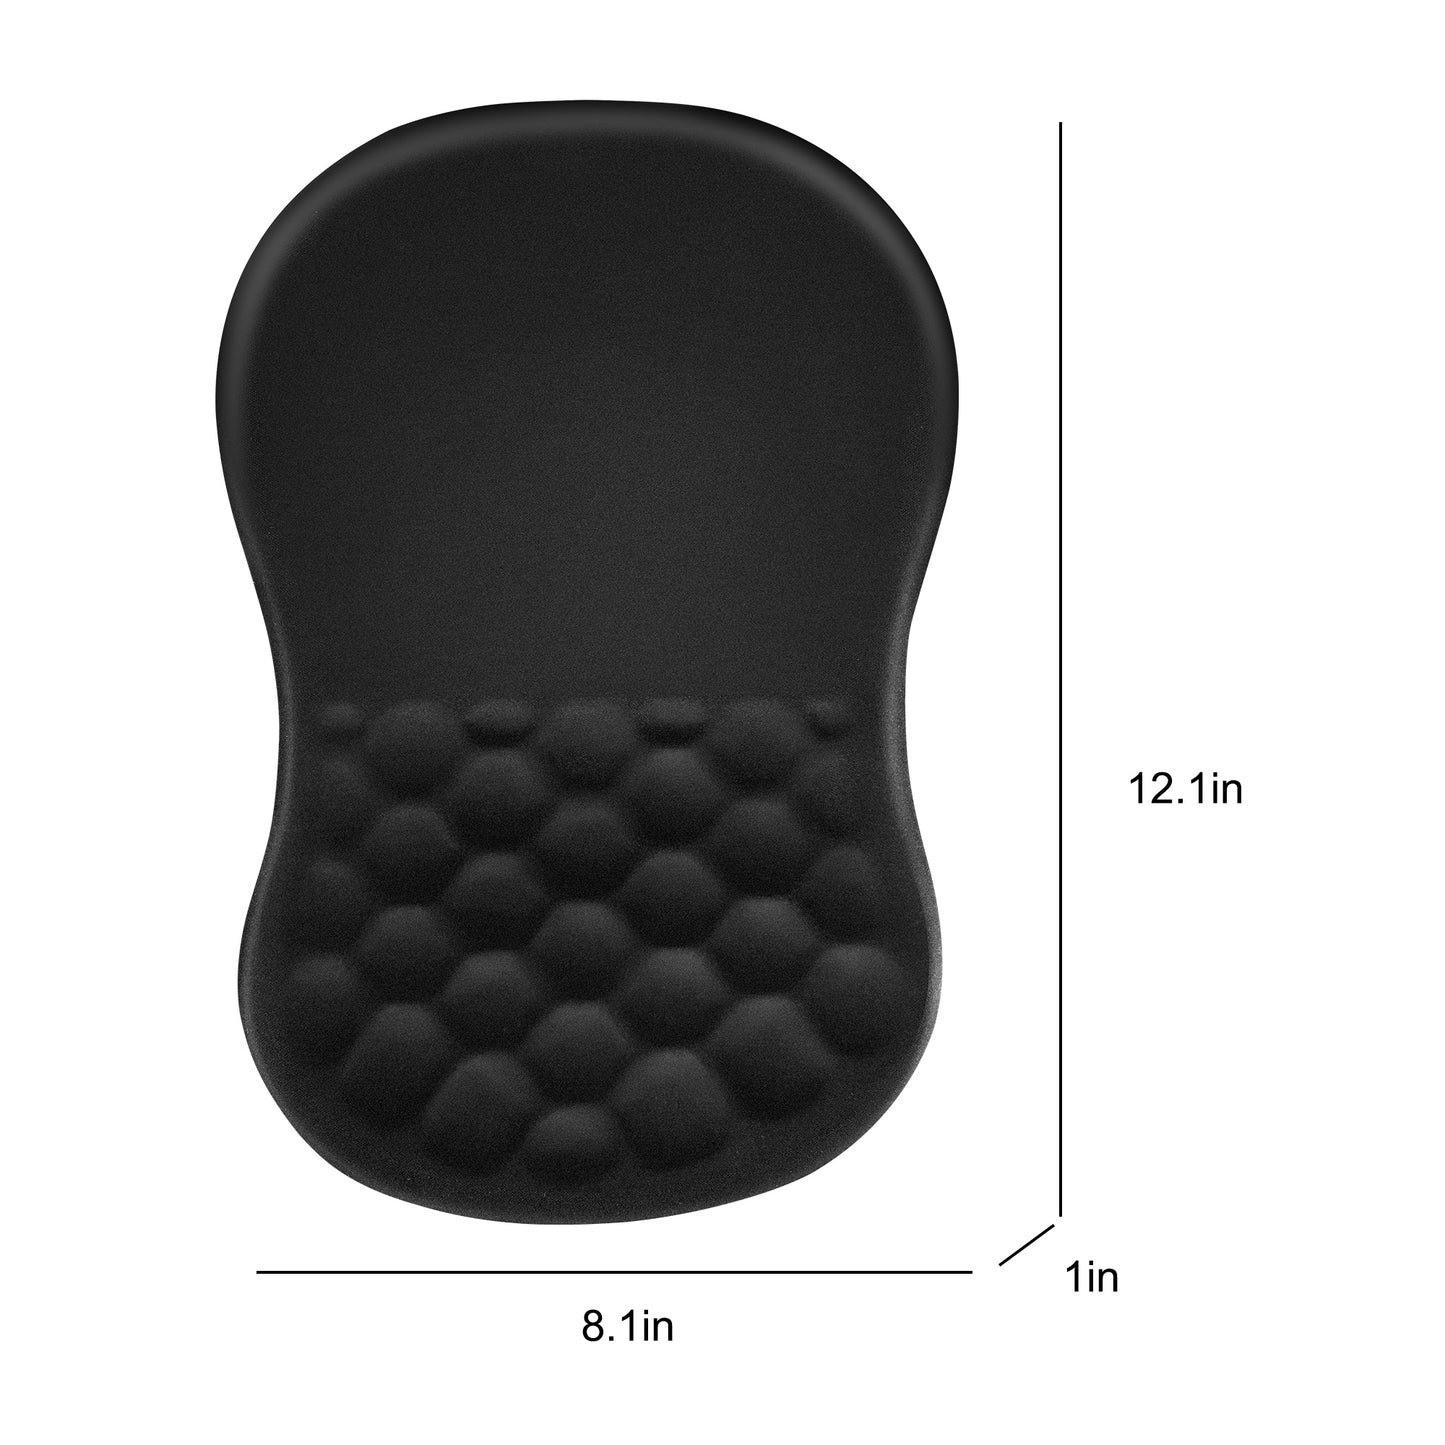 Ergonomic Wrist Support Mouse Pad - Wrist Rest with Memory Foam and Non-Slip PU Base for Pain Relief and Enhanced Functionality in Computer Activities (Black)